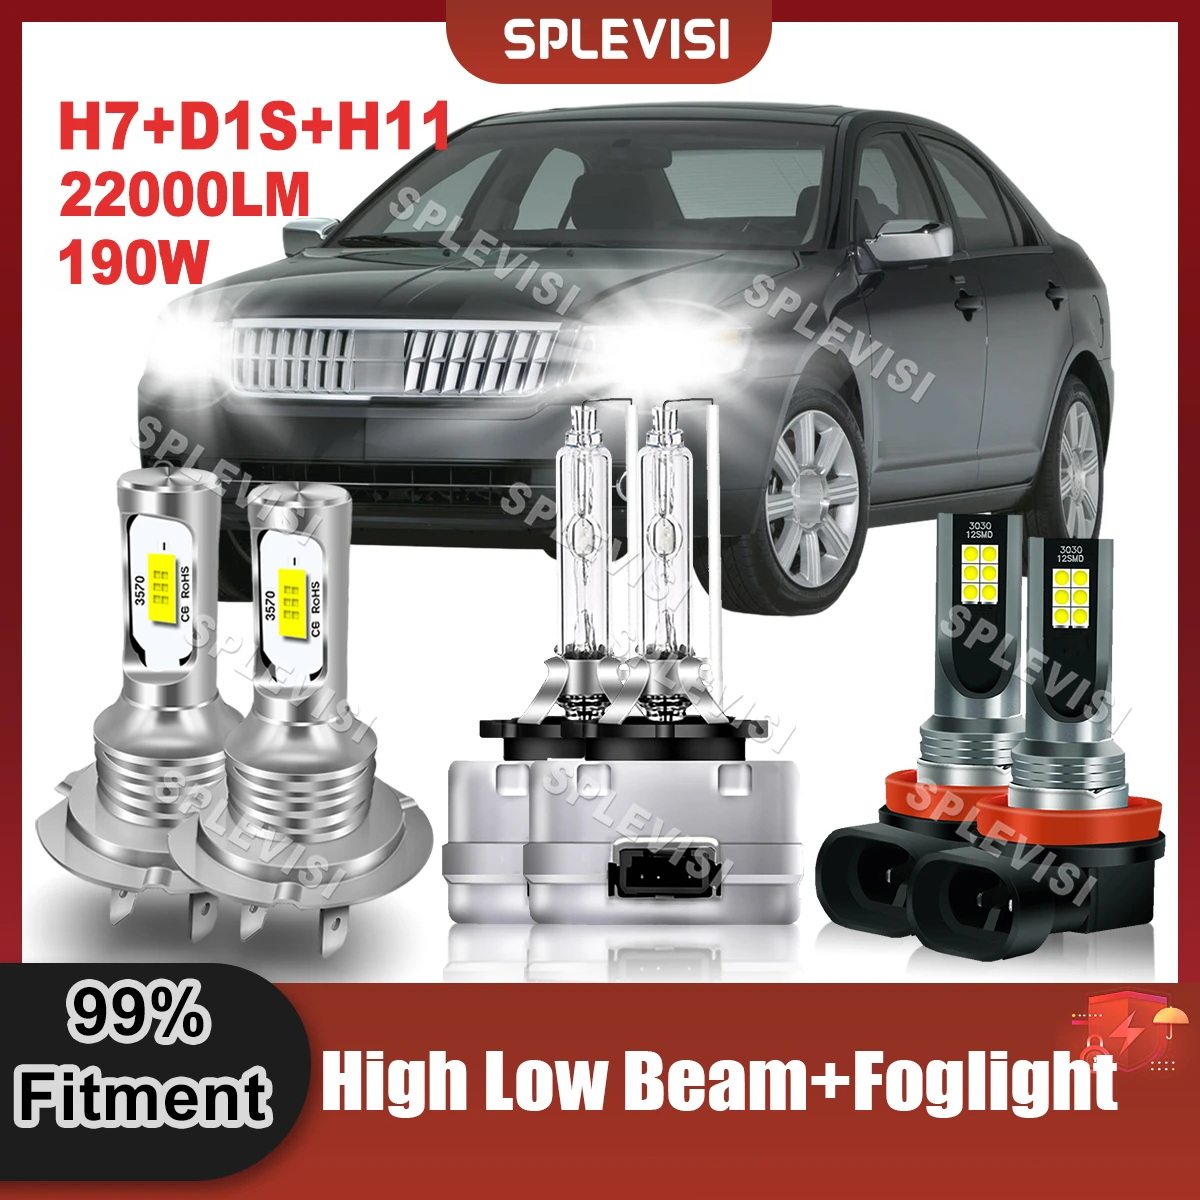 

Plug And Play LED Headlight Bulbs HID White 6000K H7 High D1S Xenon Low Beam H11 Foglamp For Lincoln MKZ 2007 2008 2009